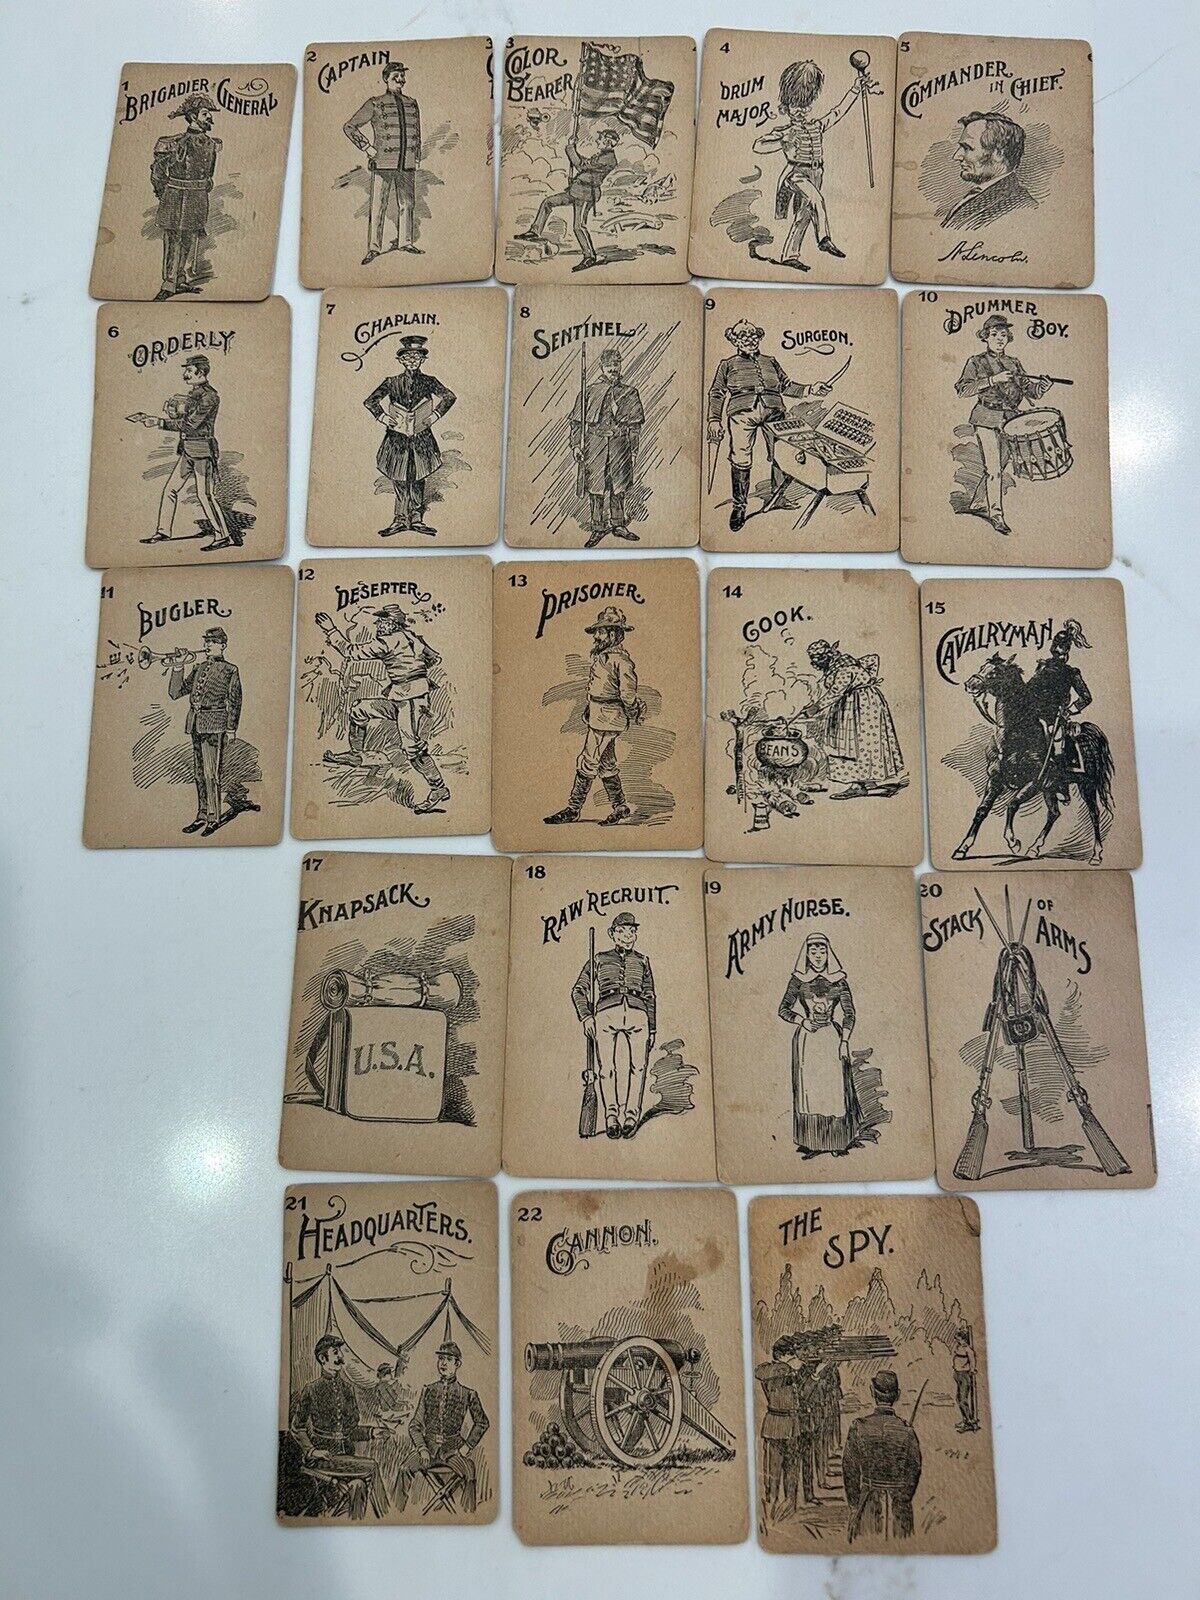  CIVIL WAR COLLECTABLE CARDS FOR THE PARLOR GAME THE SPY ANTIQUE  1890 VINTAGE